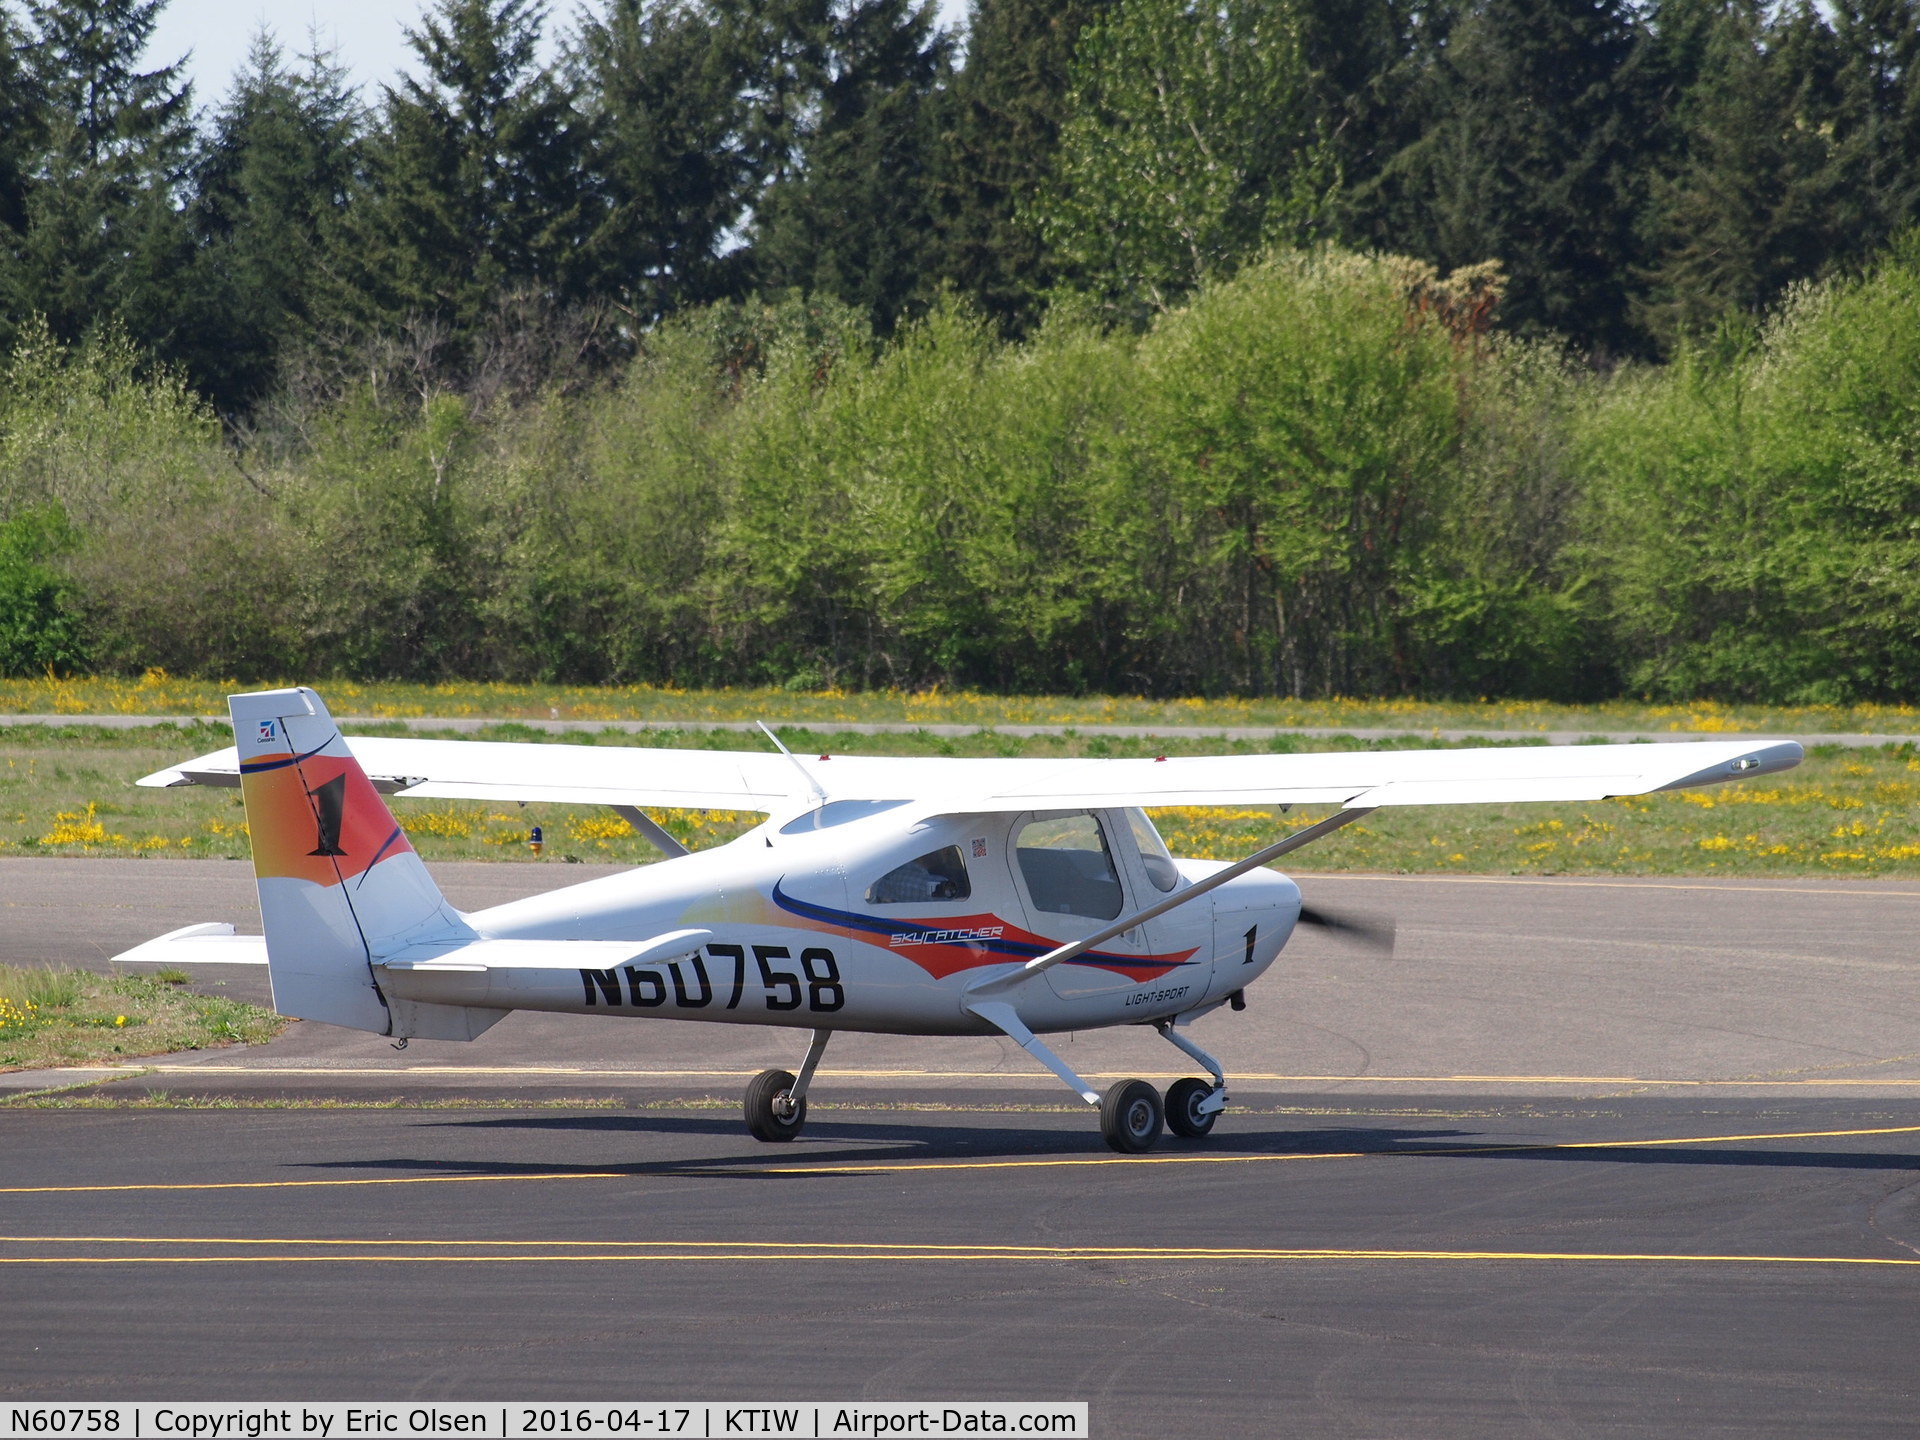 N60758, 2012 Cessna 162 Skycatcher C/N 16200216, Cessna 162 at the Tacoma Narrows Airport.